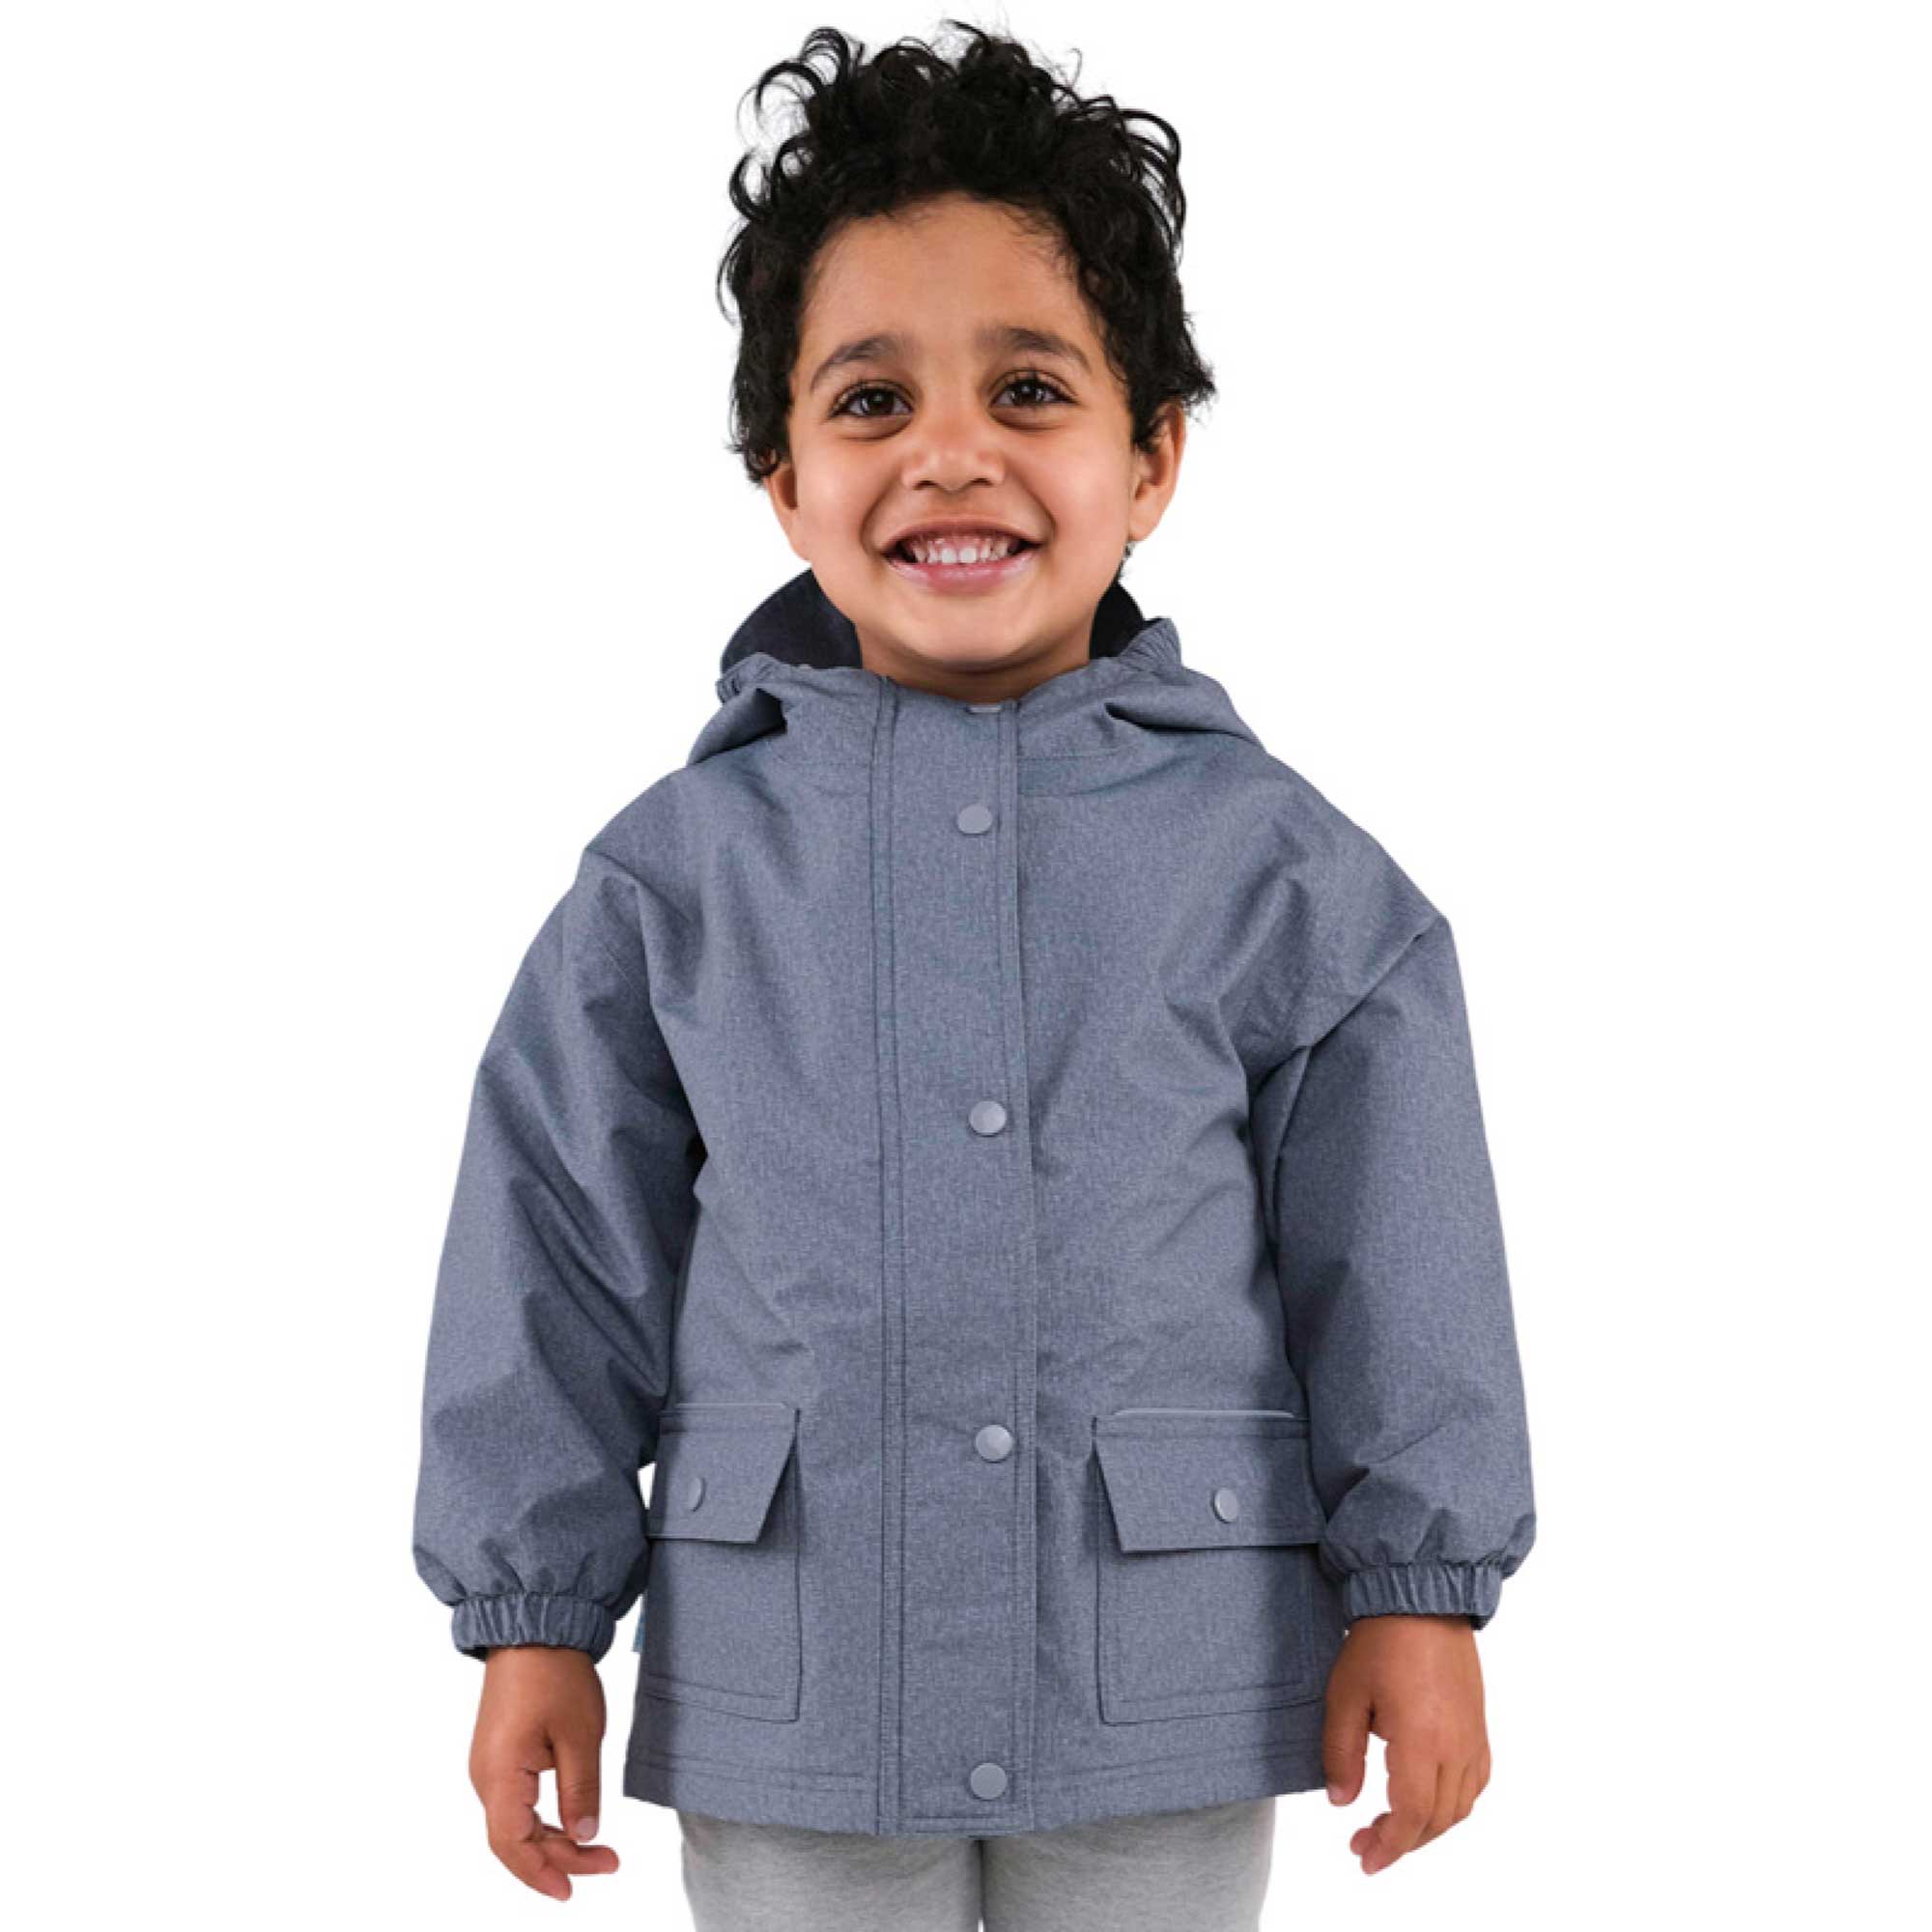 Toddler Boys' Water-Resistant Jacket (2T-4T)